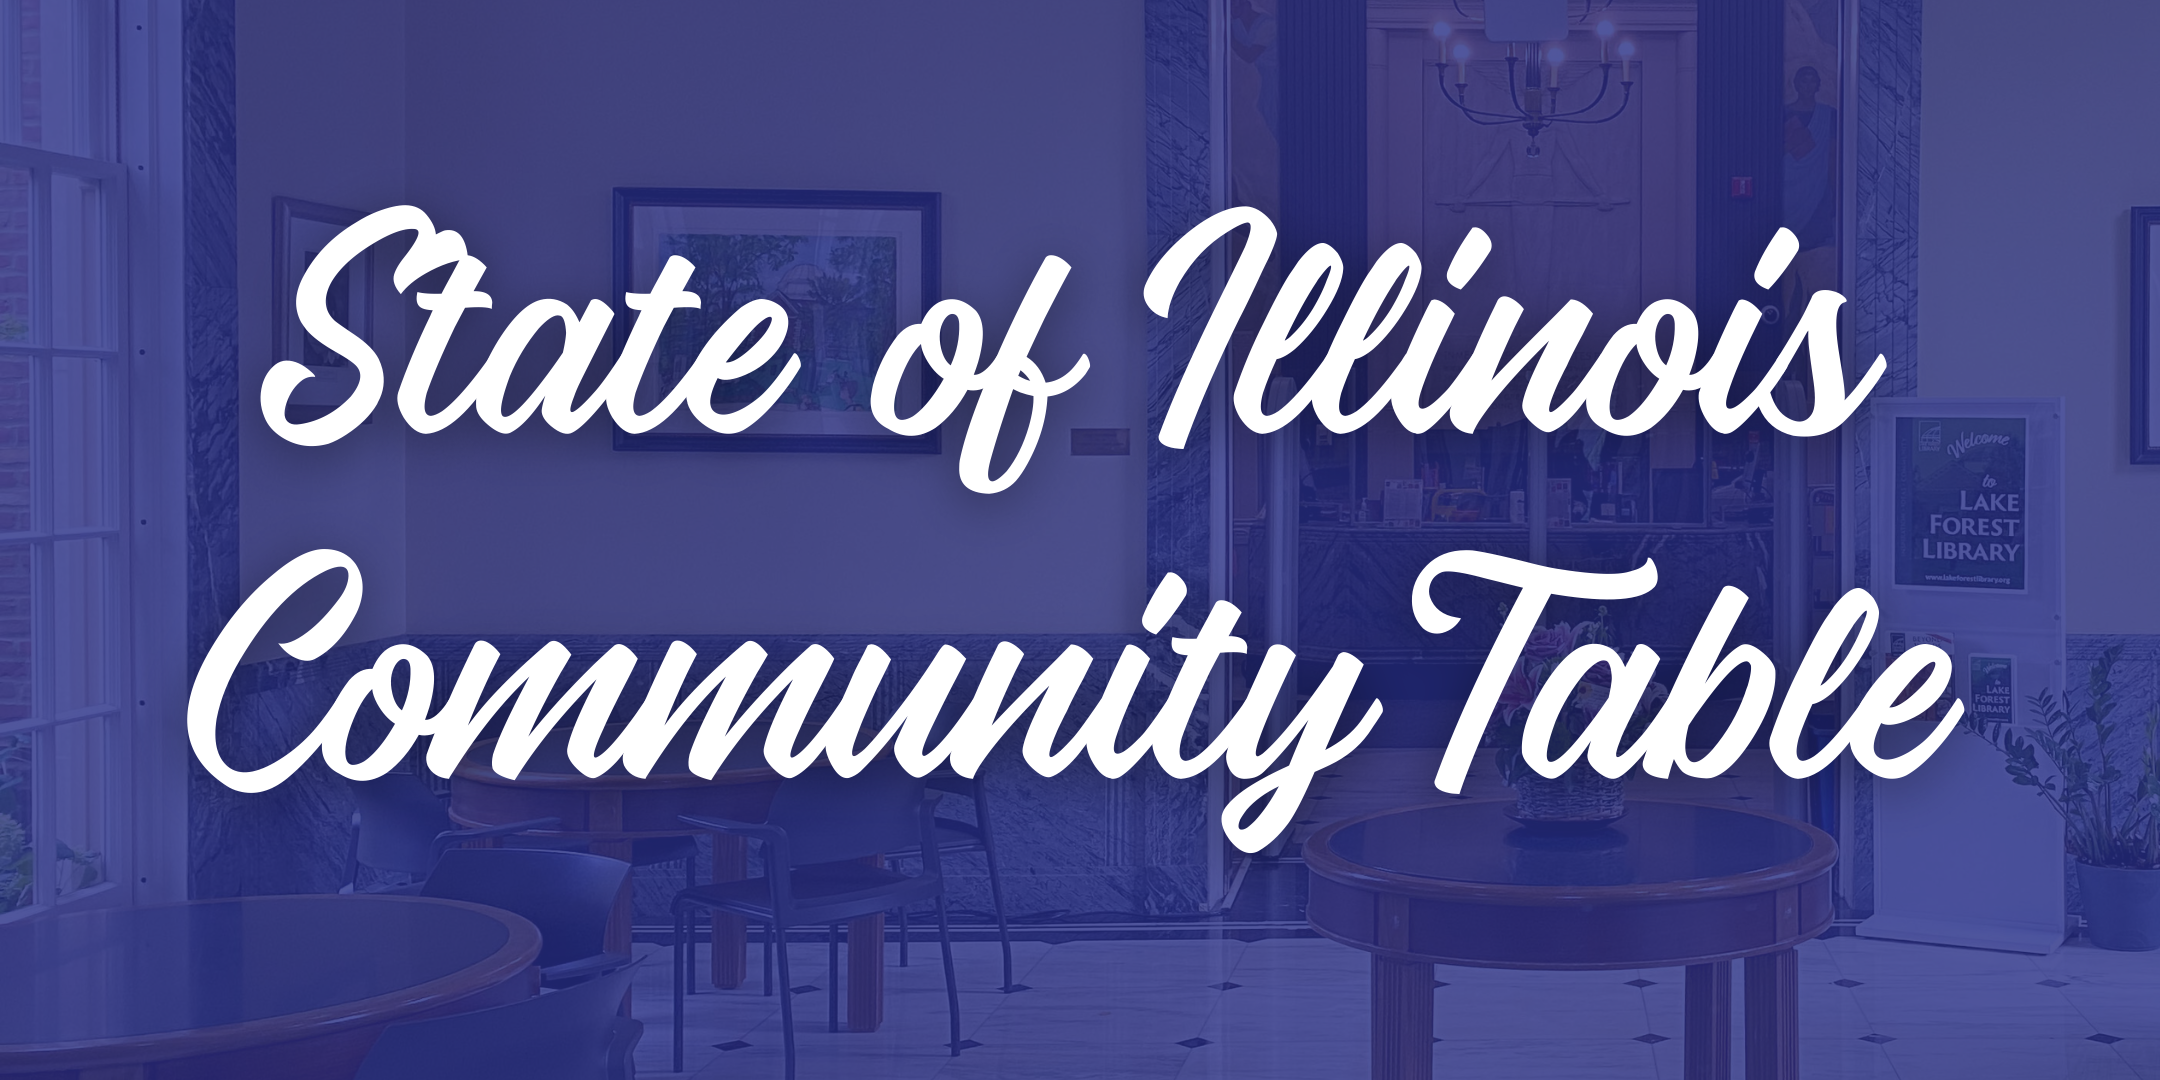 Image of "State of Illinois Community Table"